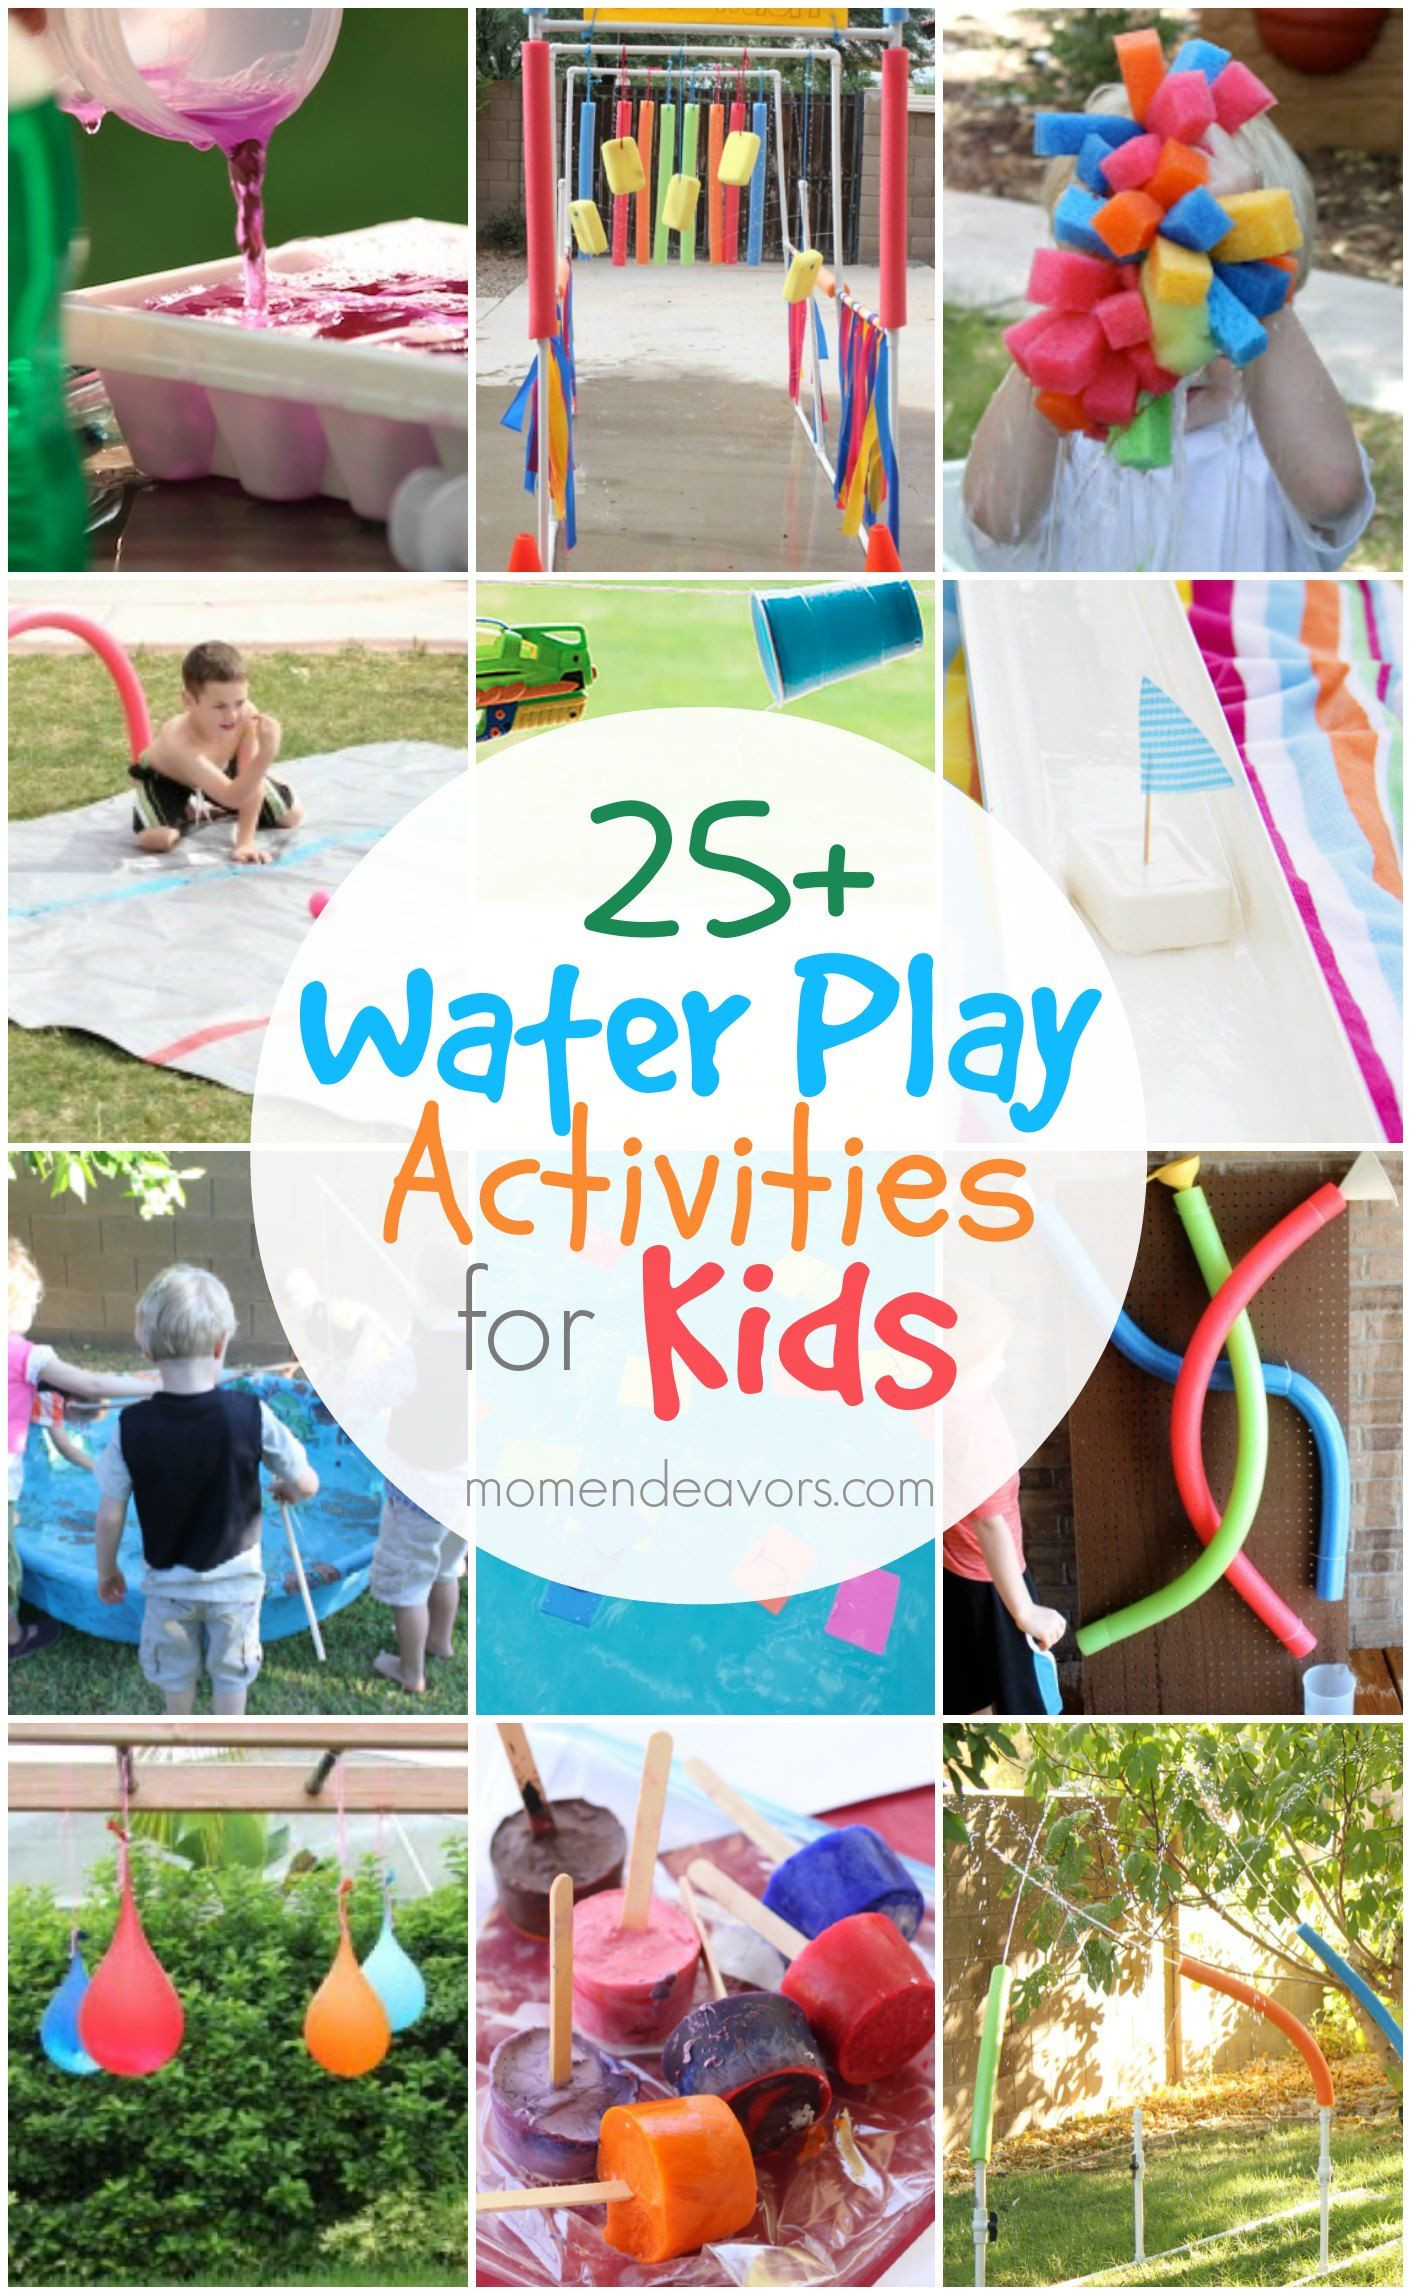 Backyard Water Party Ideas
 25 Outdoor Water Play Activities for Kids so many fun